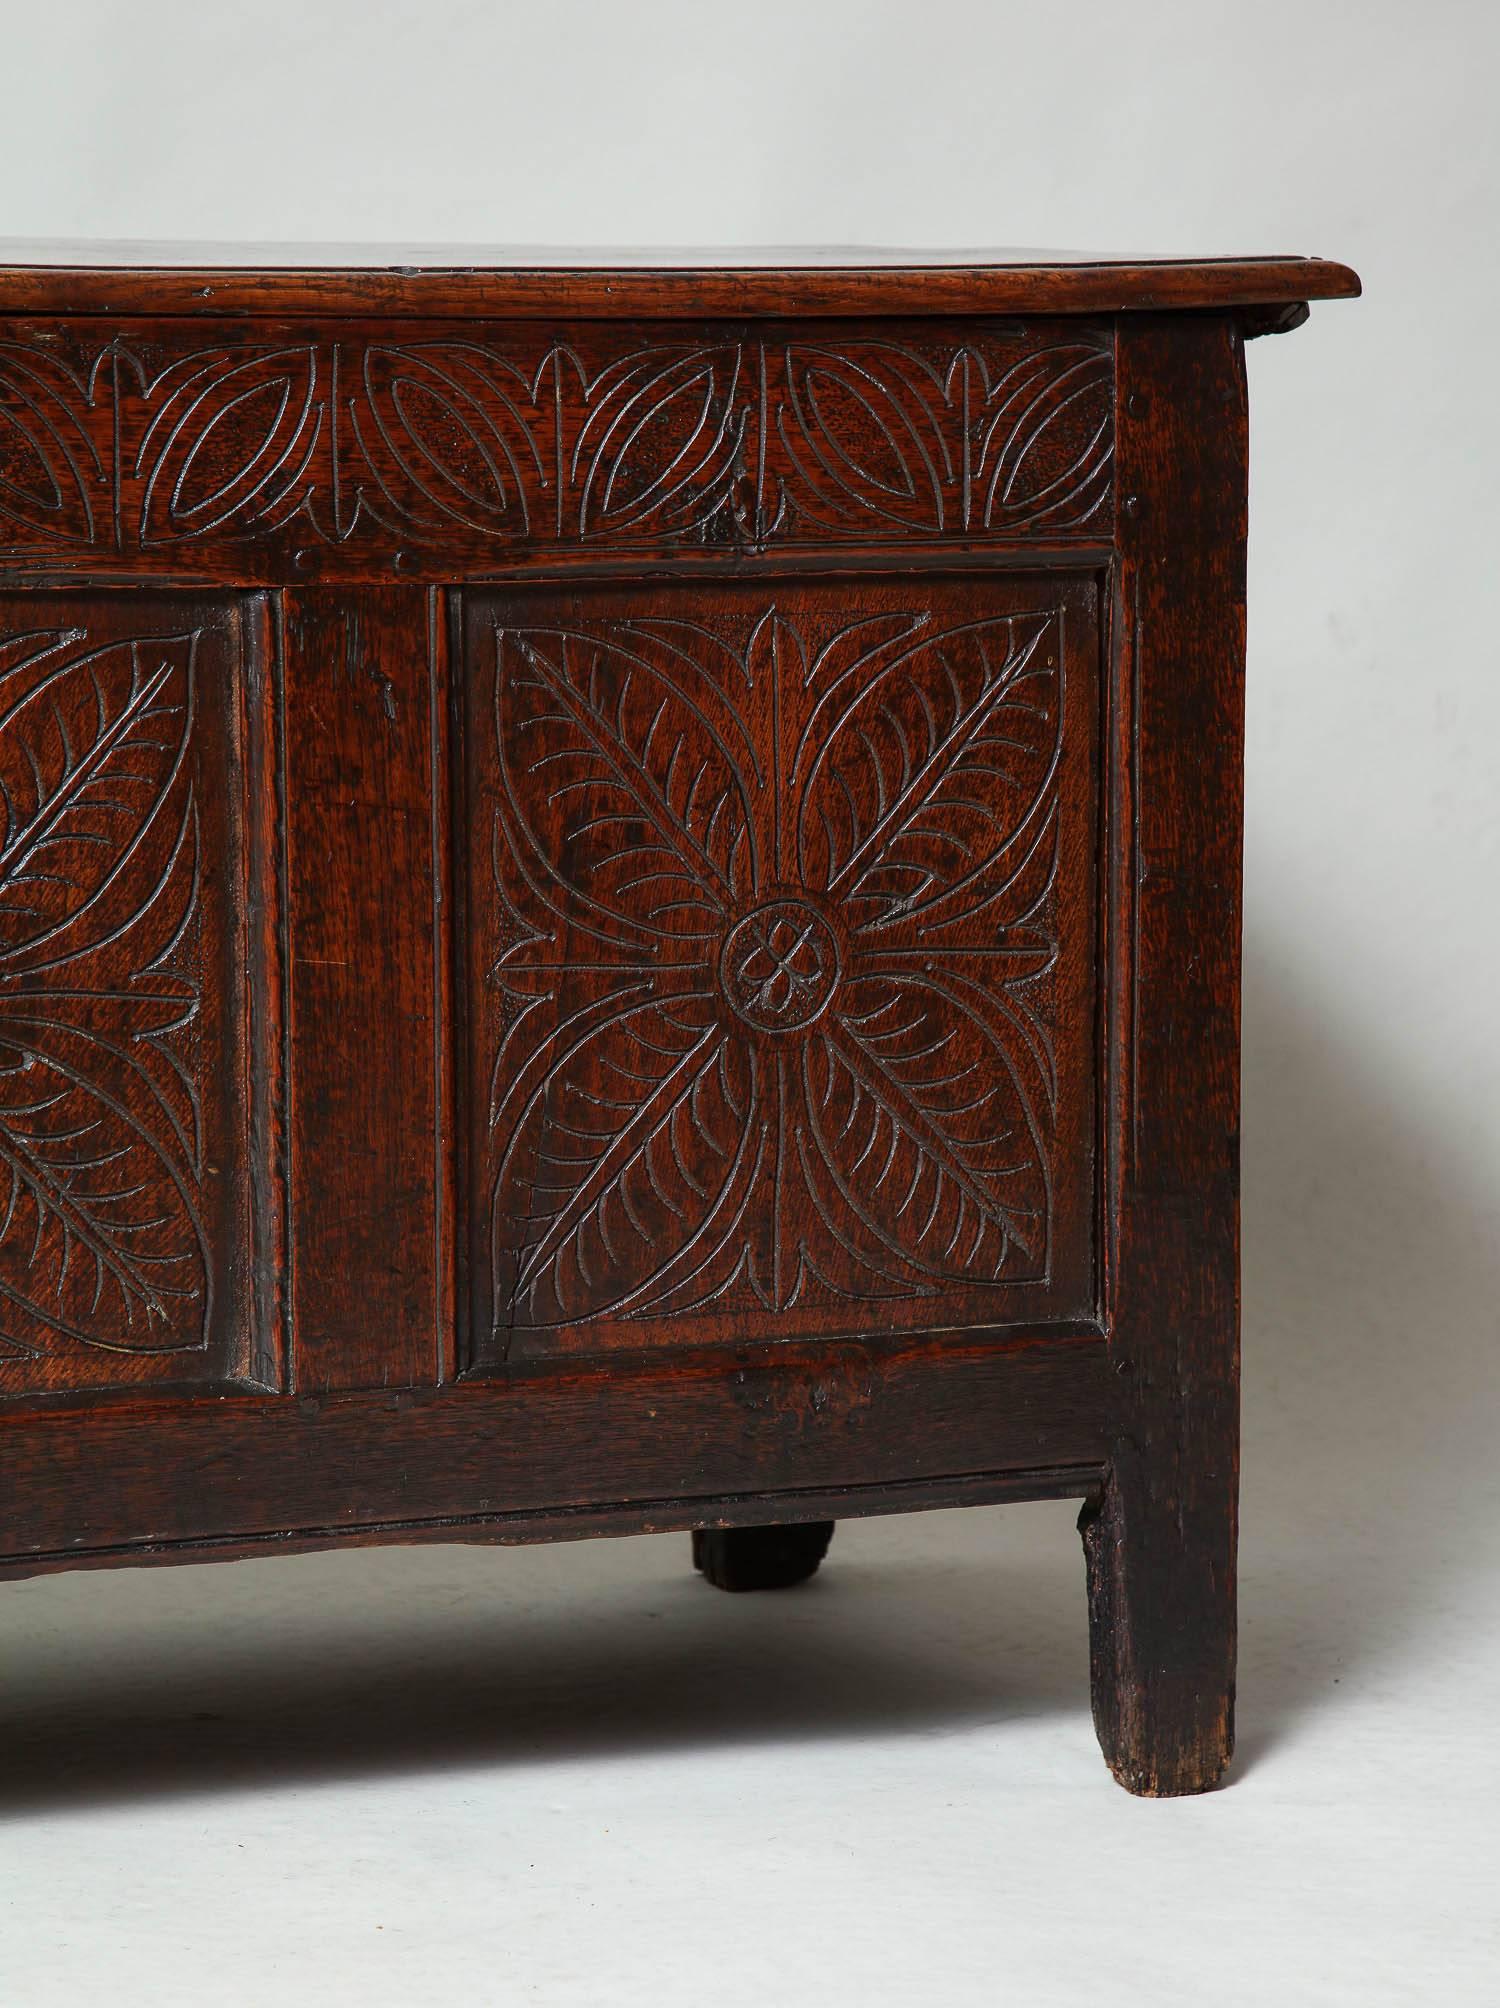 Fine Charles II period carved oak coffer having plank top and paneled carcass, the two board top with thumb molded edge, the three panels with quatrefoil shallow carving, the top rail with similarly carved lunettes and stylized tulips, two regional